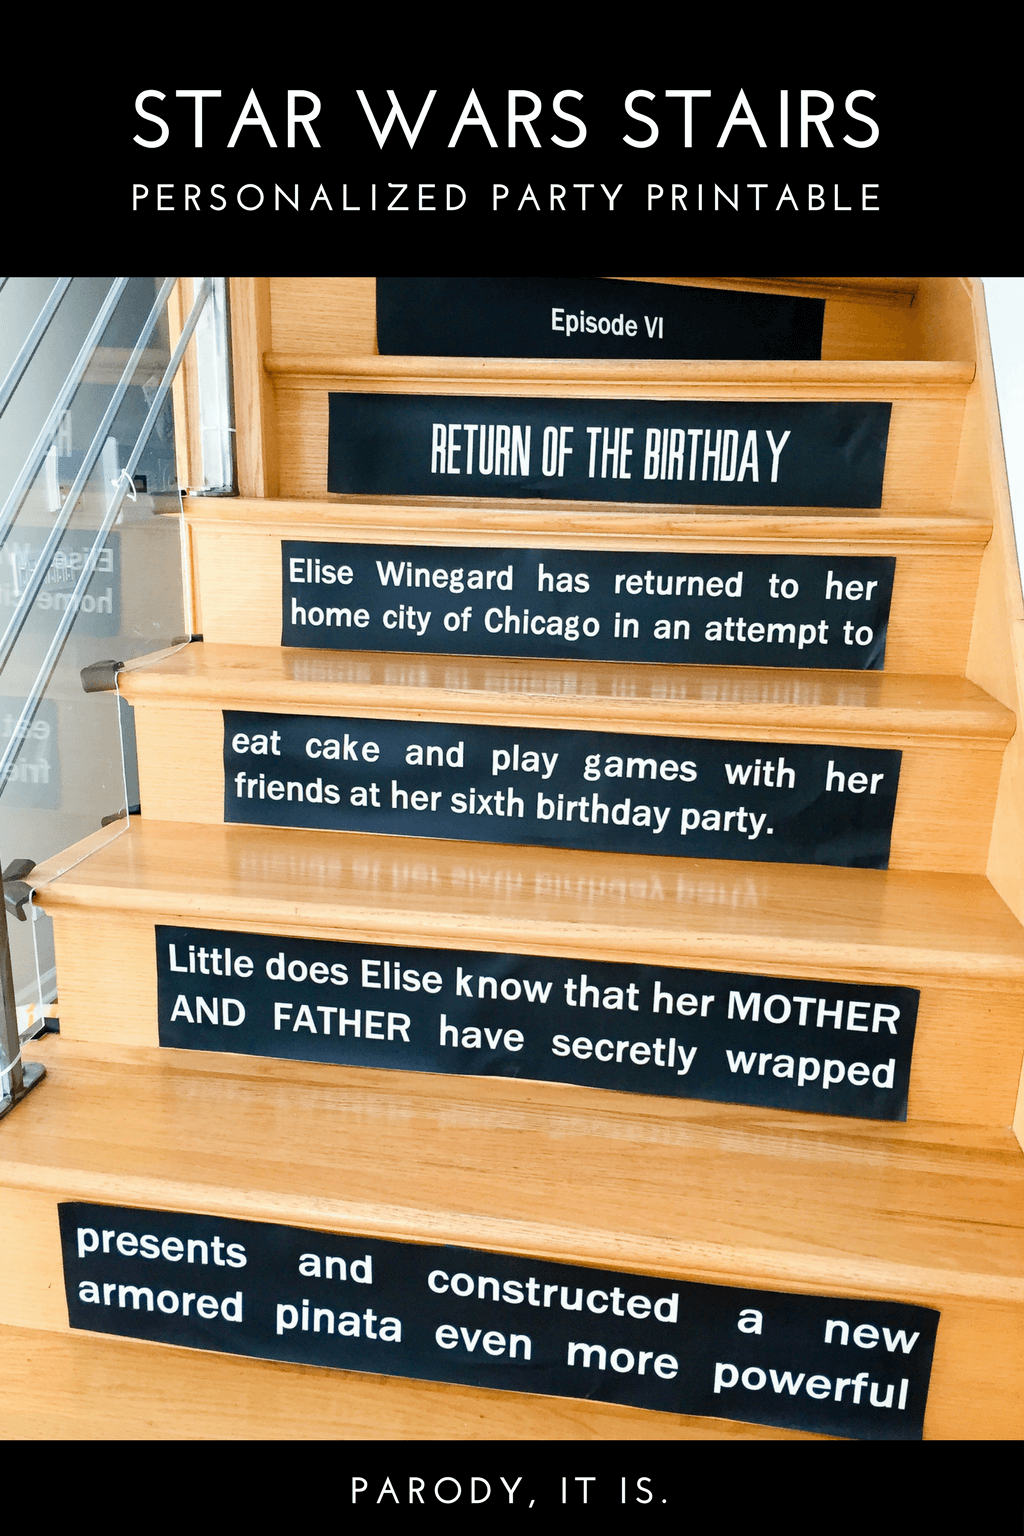 Make a DIY Star Wars opening crawl on stair risers - what a great idea! This printable is quick and easy to personalize and print for a Star Wars birthday party. Yub Nub! #starwarsbirthday #starwars